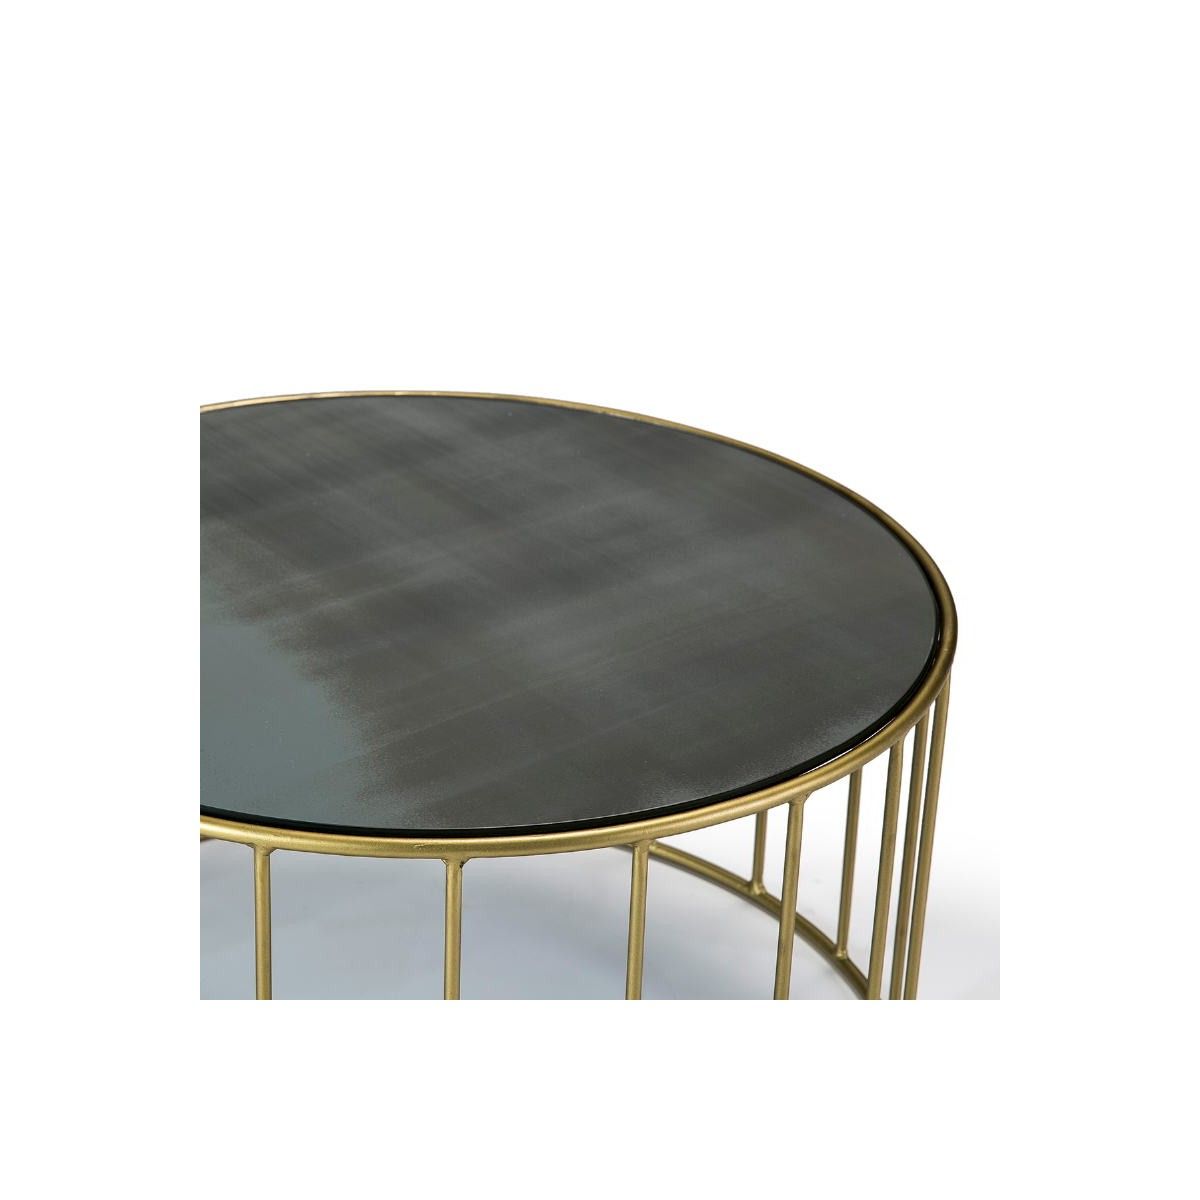 Coffee Table 101x101x45 Mirror Aged Metal Golden In Most Popular Mirrored Outdoor Tables (View 8 of 15)